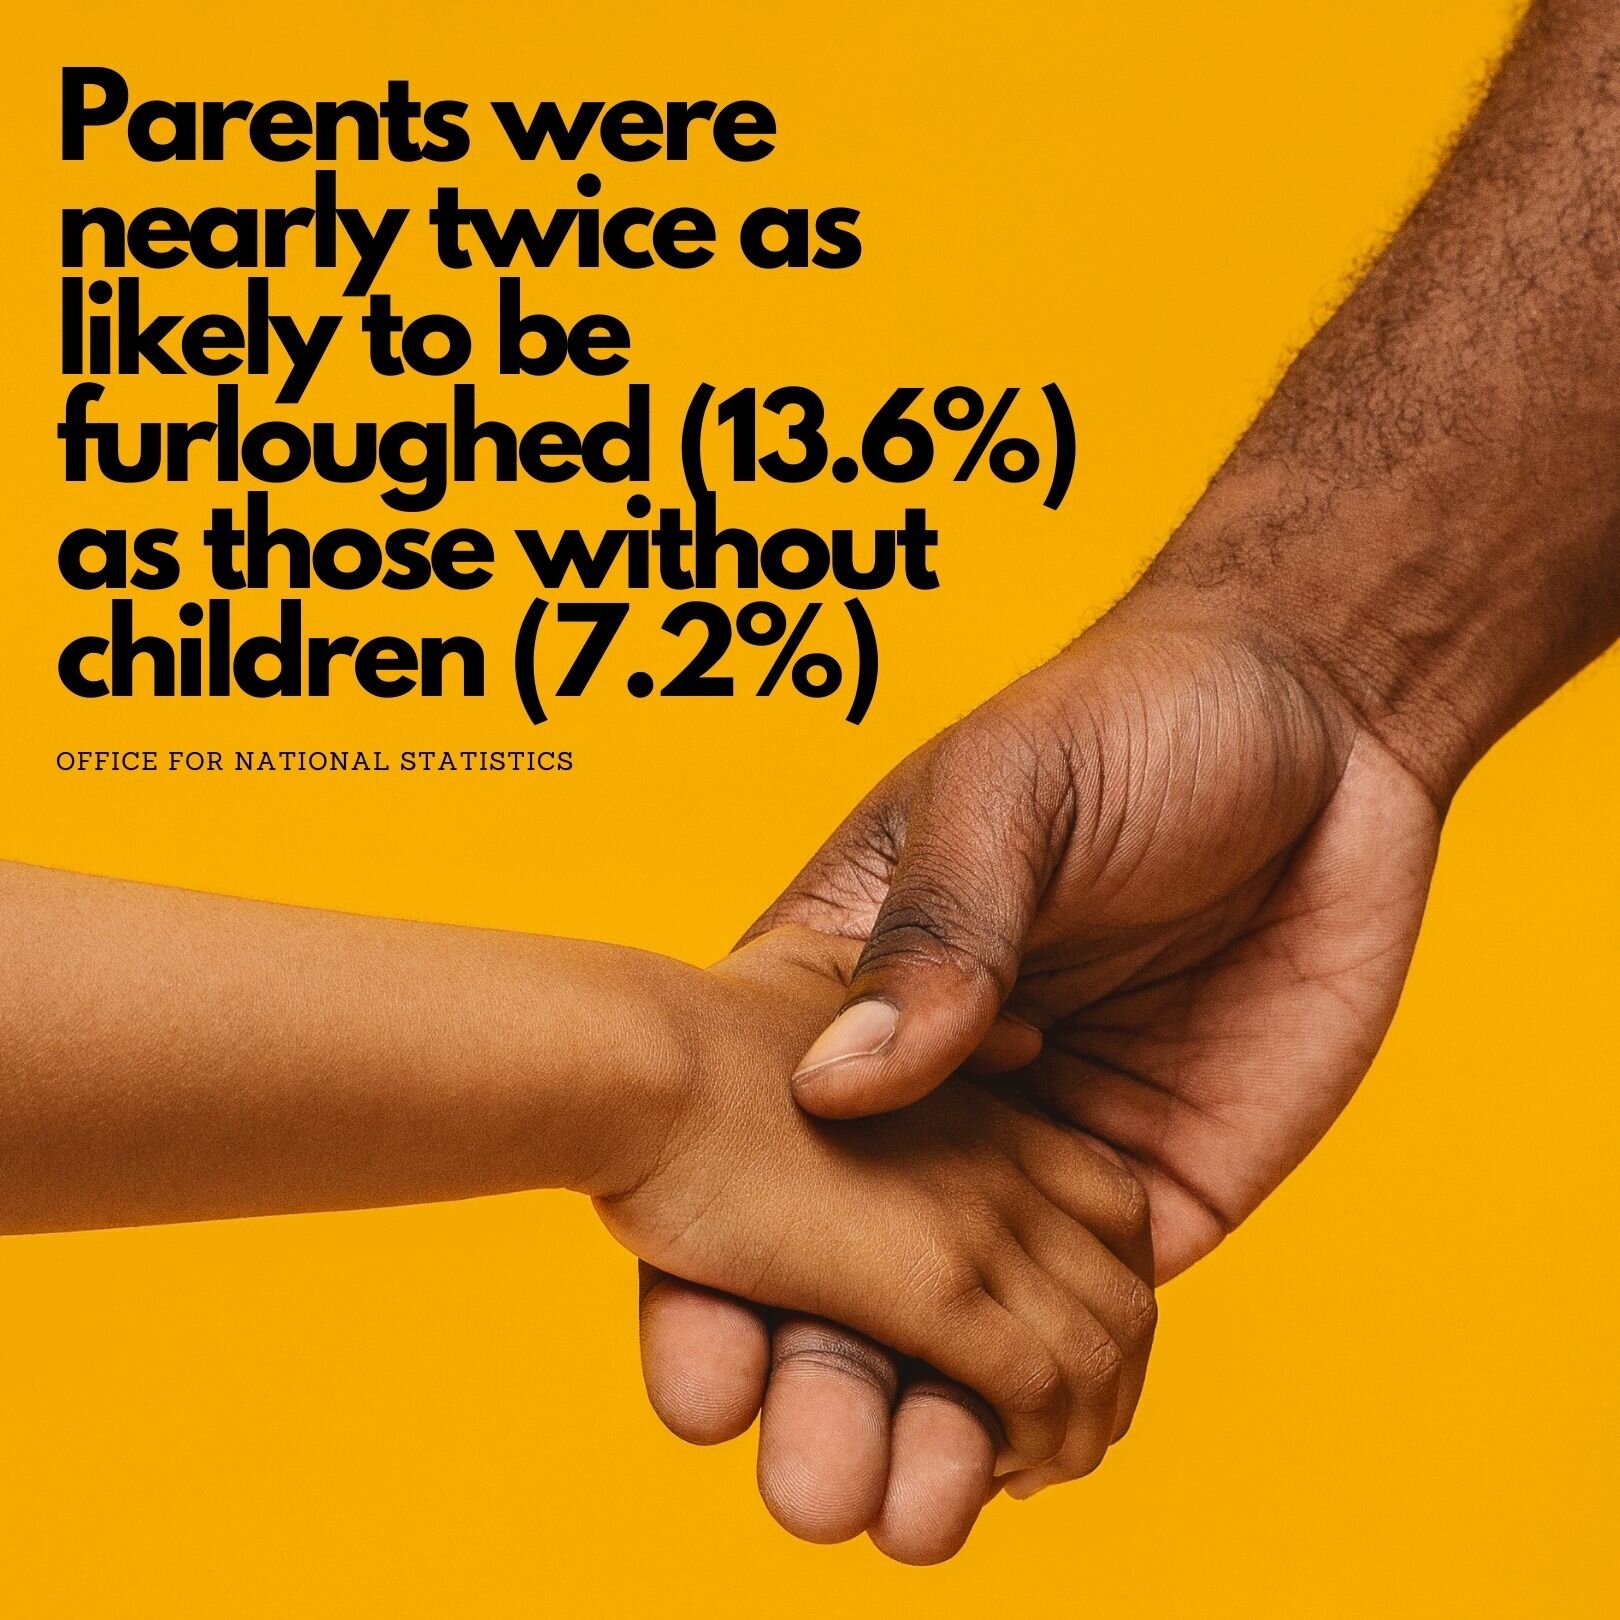 Parents were nearly twice as likely to be furloughed (13.6%) as those without children (7.2%).jpg